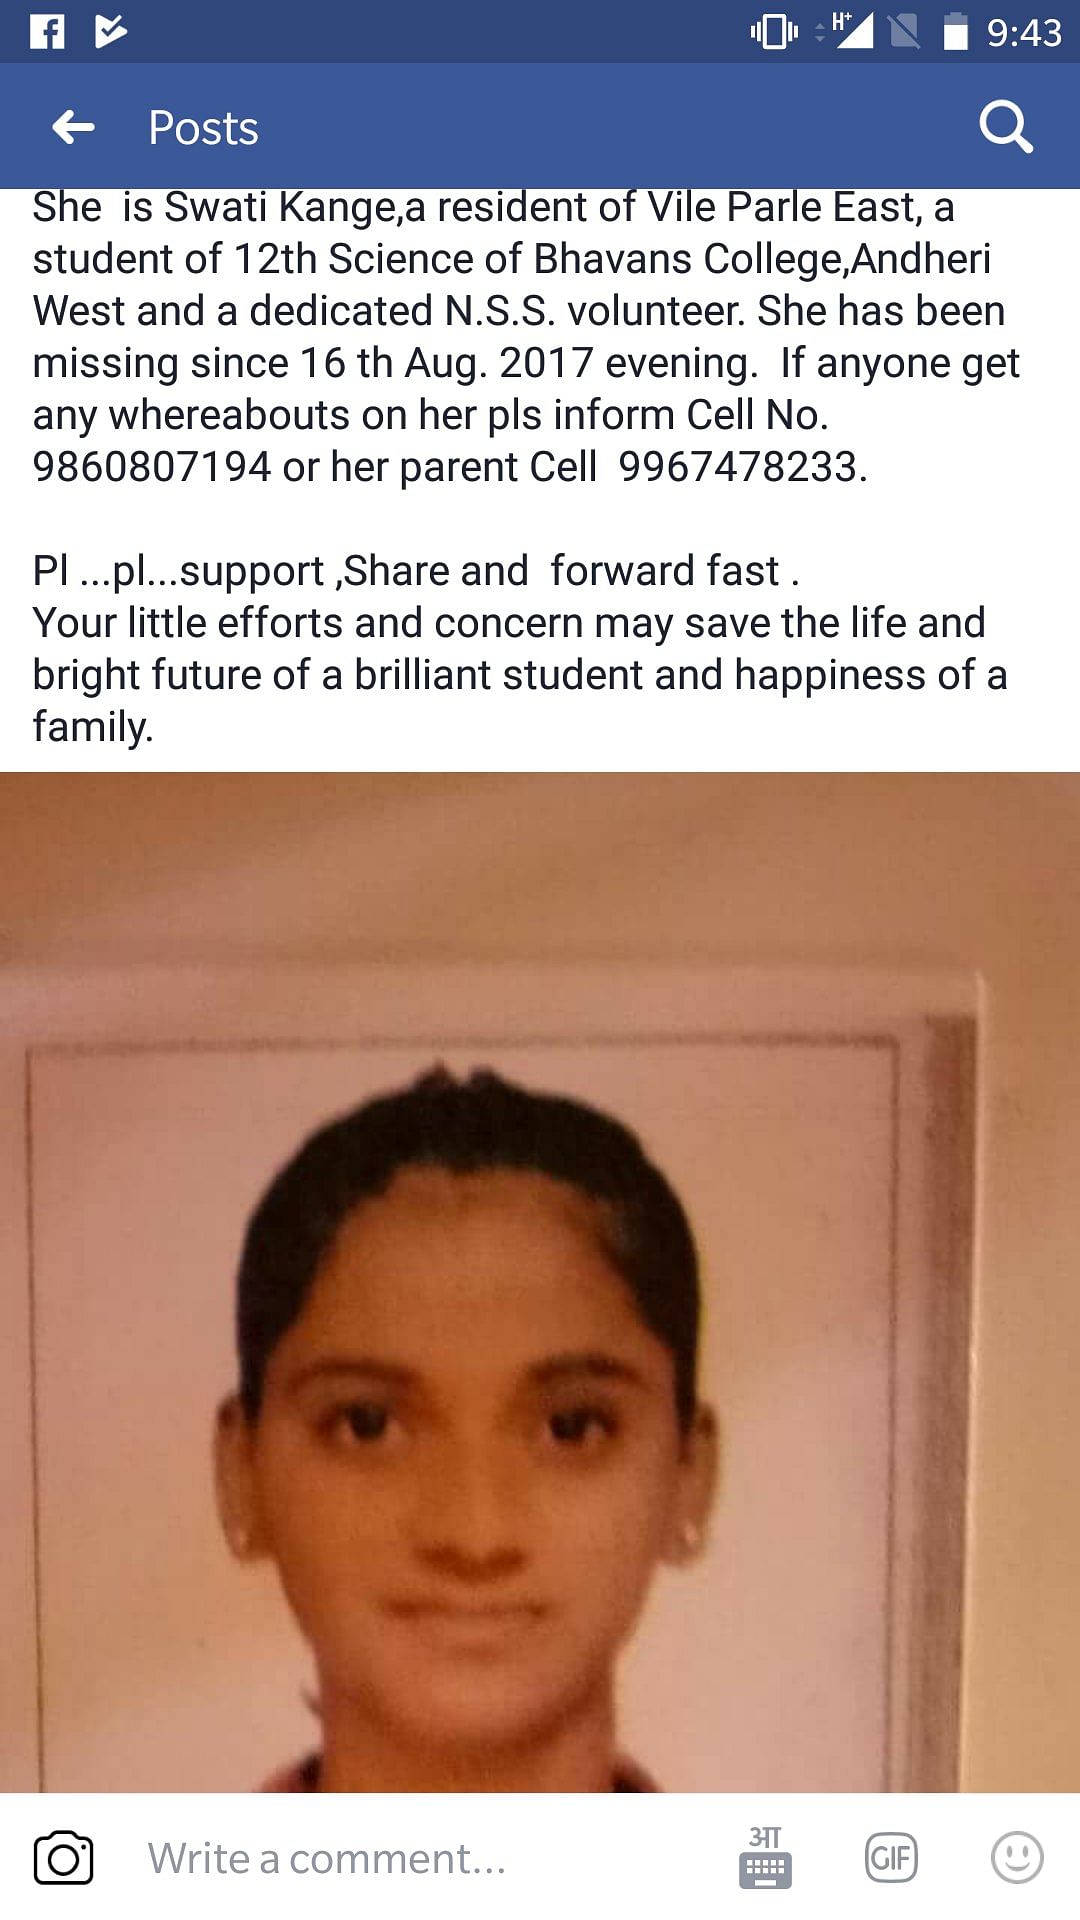 Cops, college and family clueless about missing girl from Vile Parle.